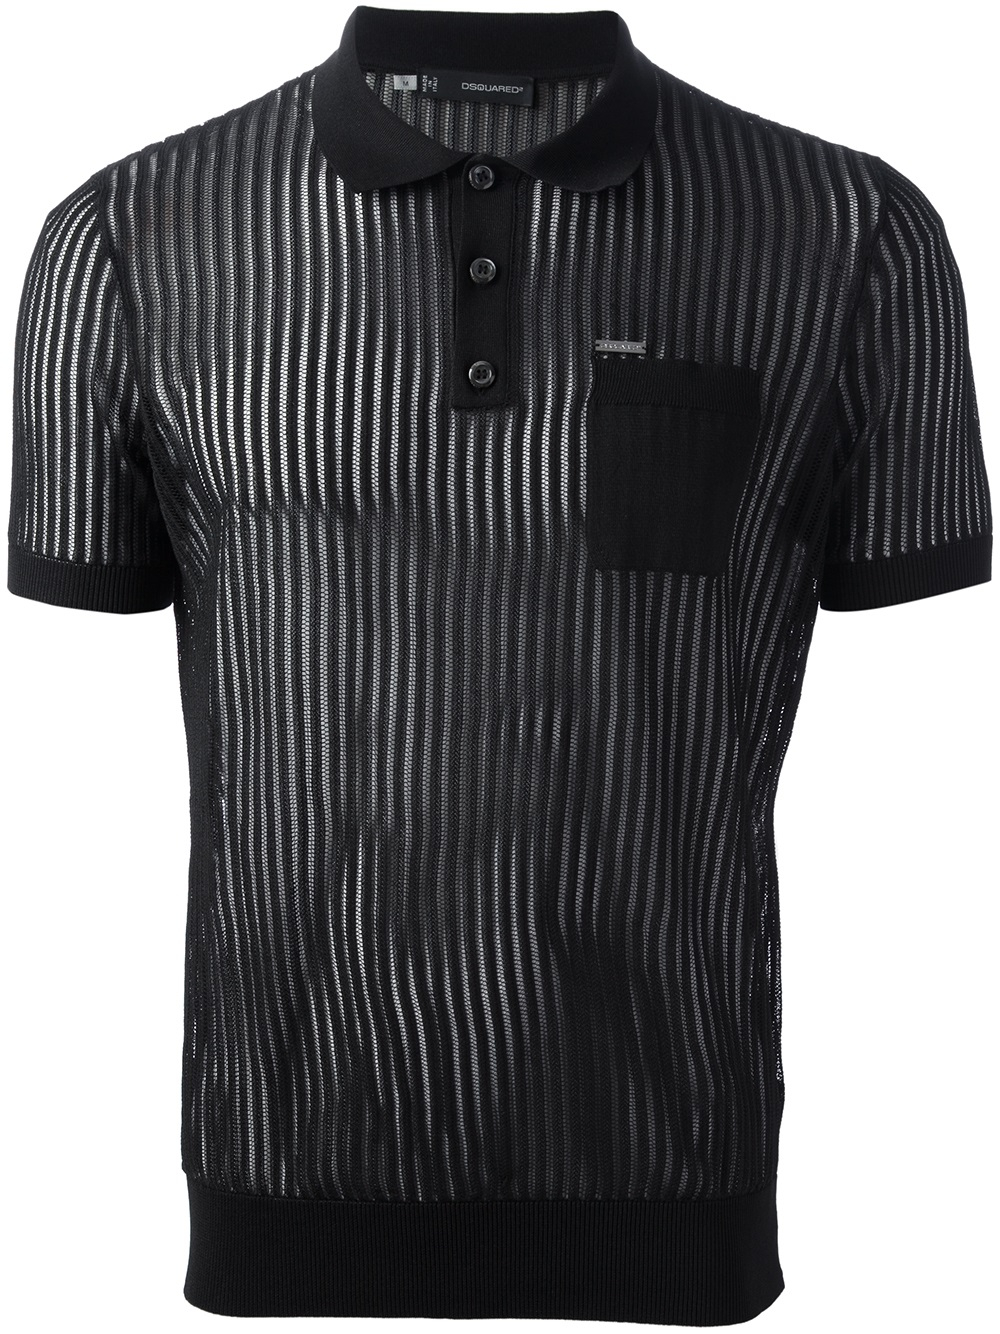 DSquared² Sheer Ribbed Polo Shirt in Black for Men - Lyst